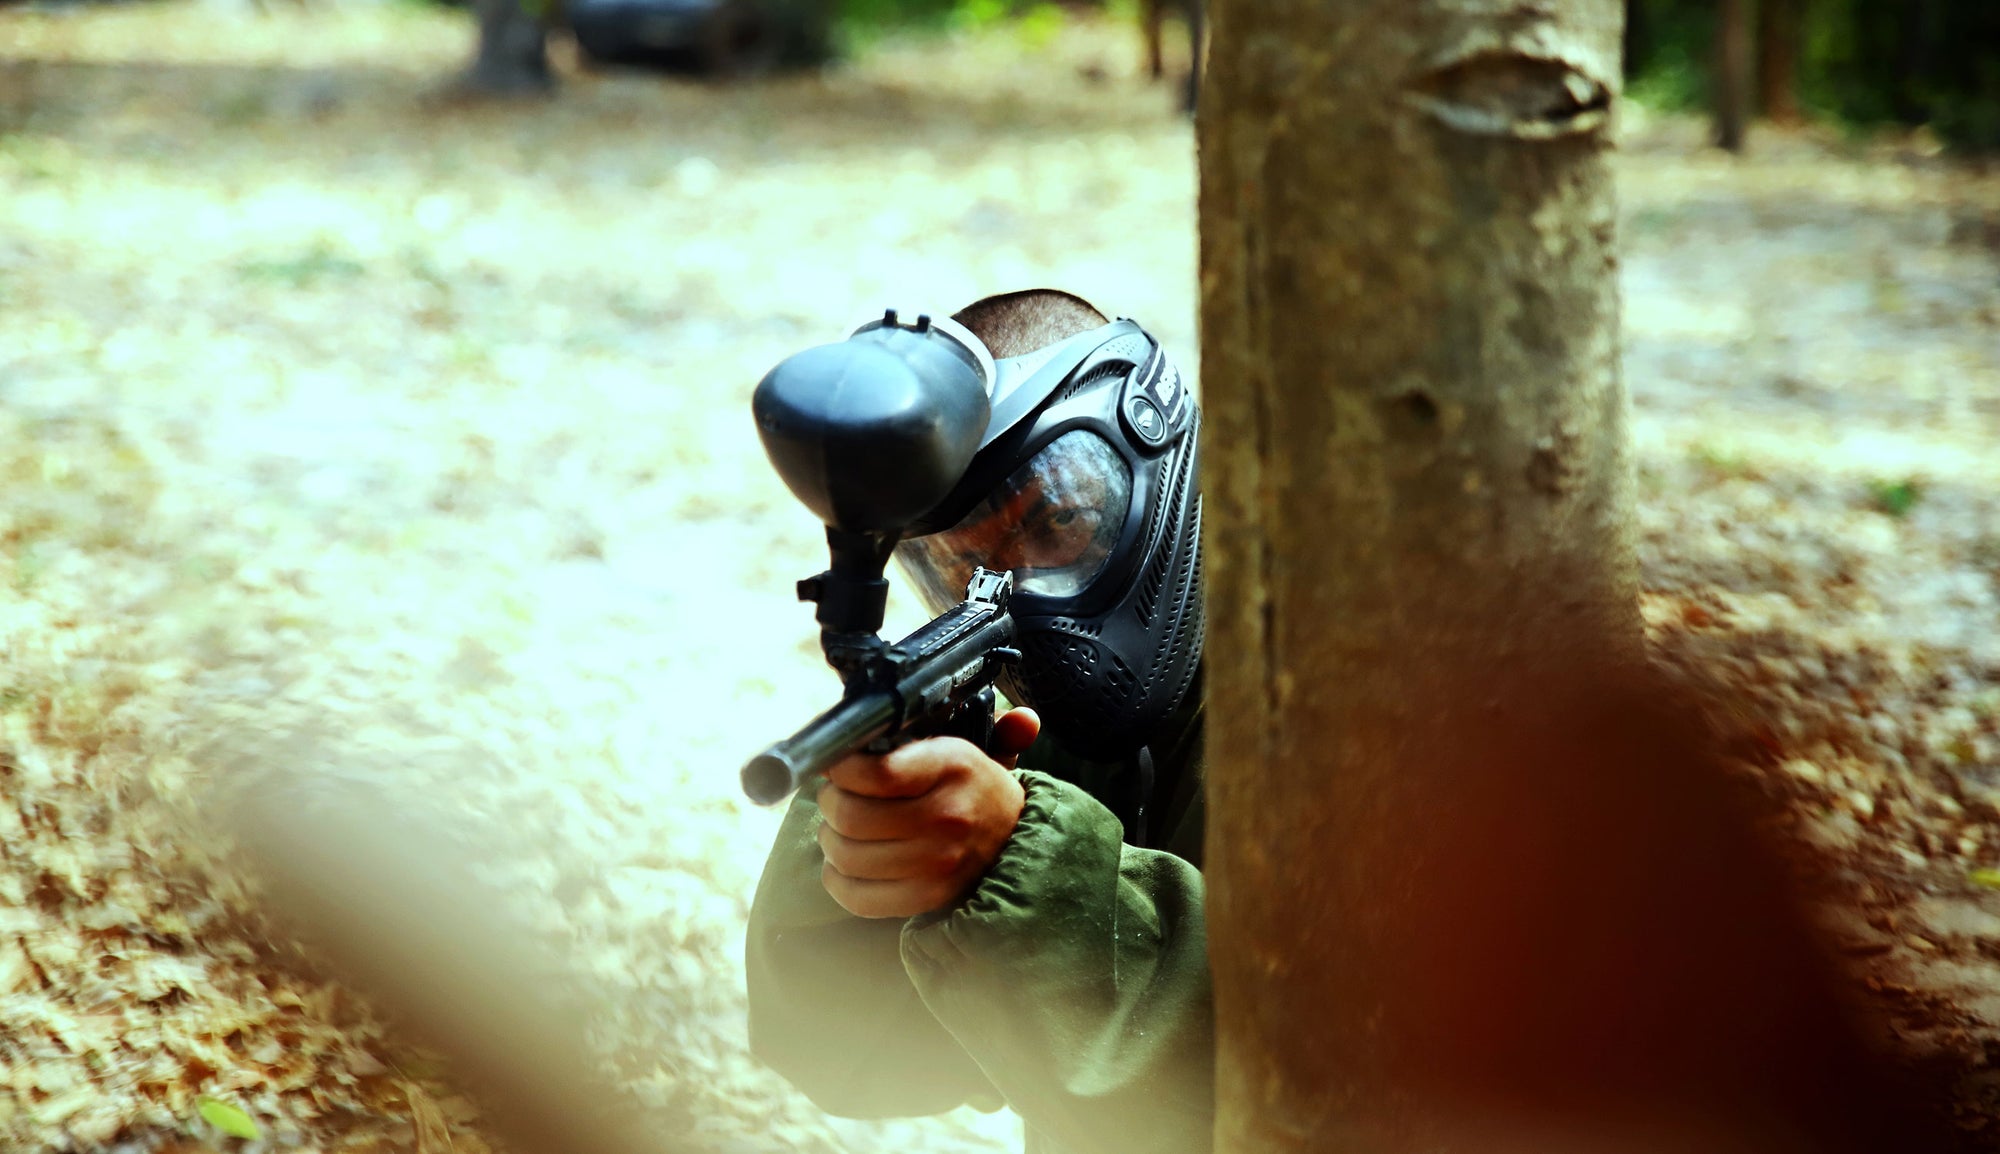 What Is The Best Alternative To Paintball?